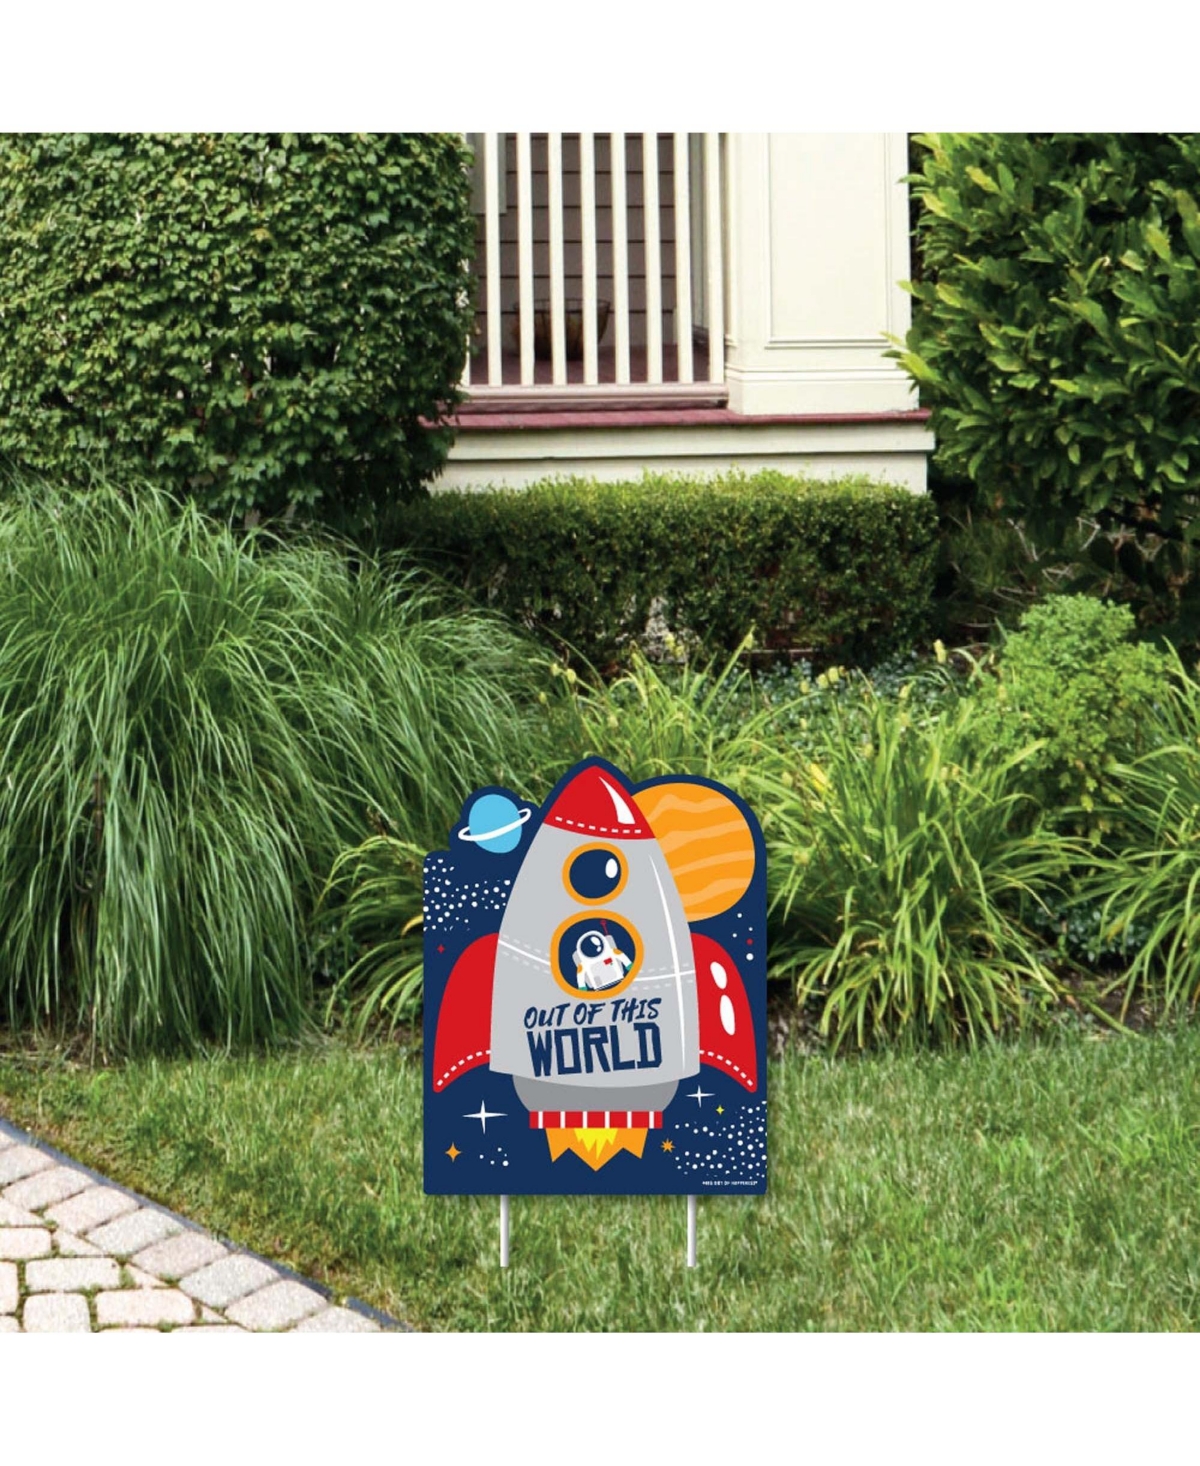 Blast Off to Outer Space - Outdoor Lawn Sign - Rocket Ship Party Yard Sign 1 Pc